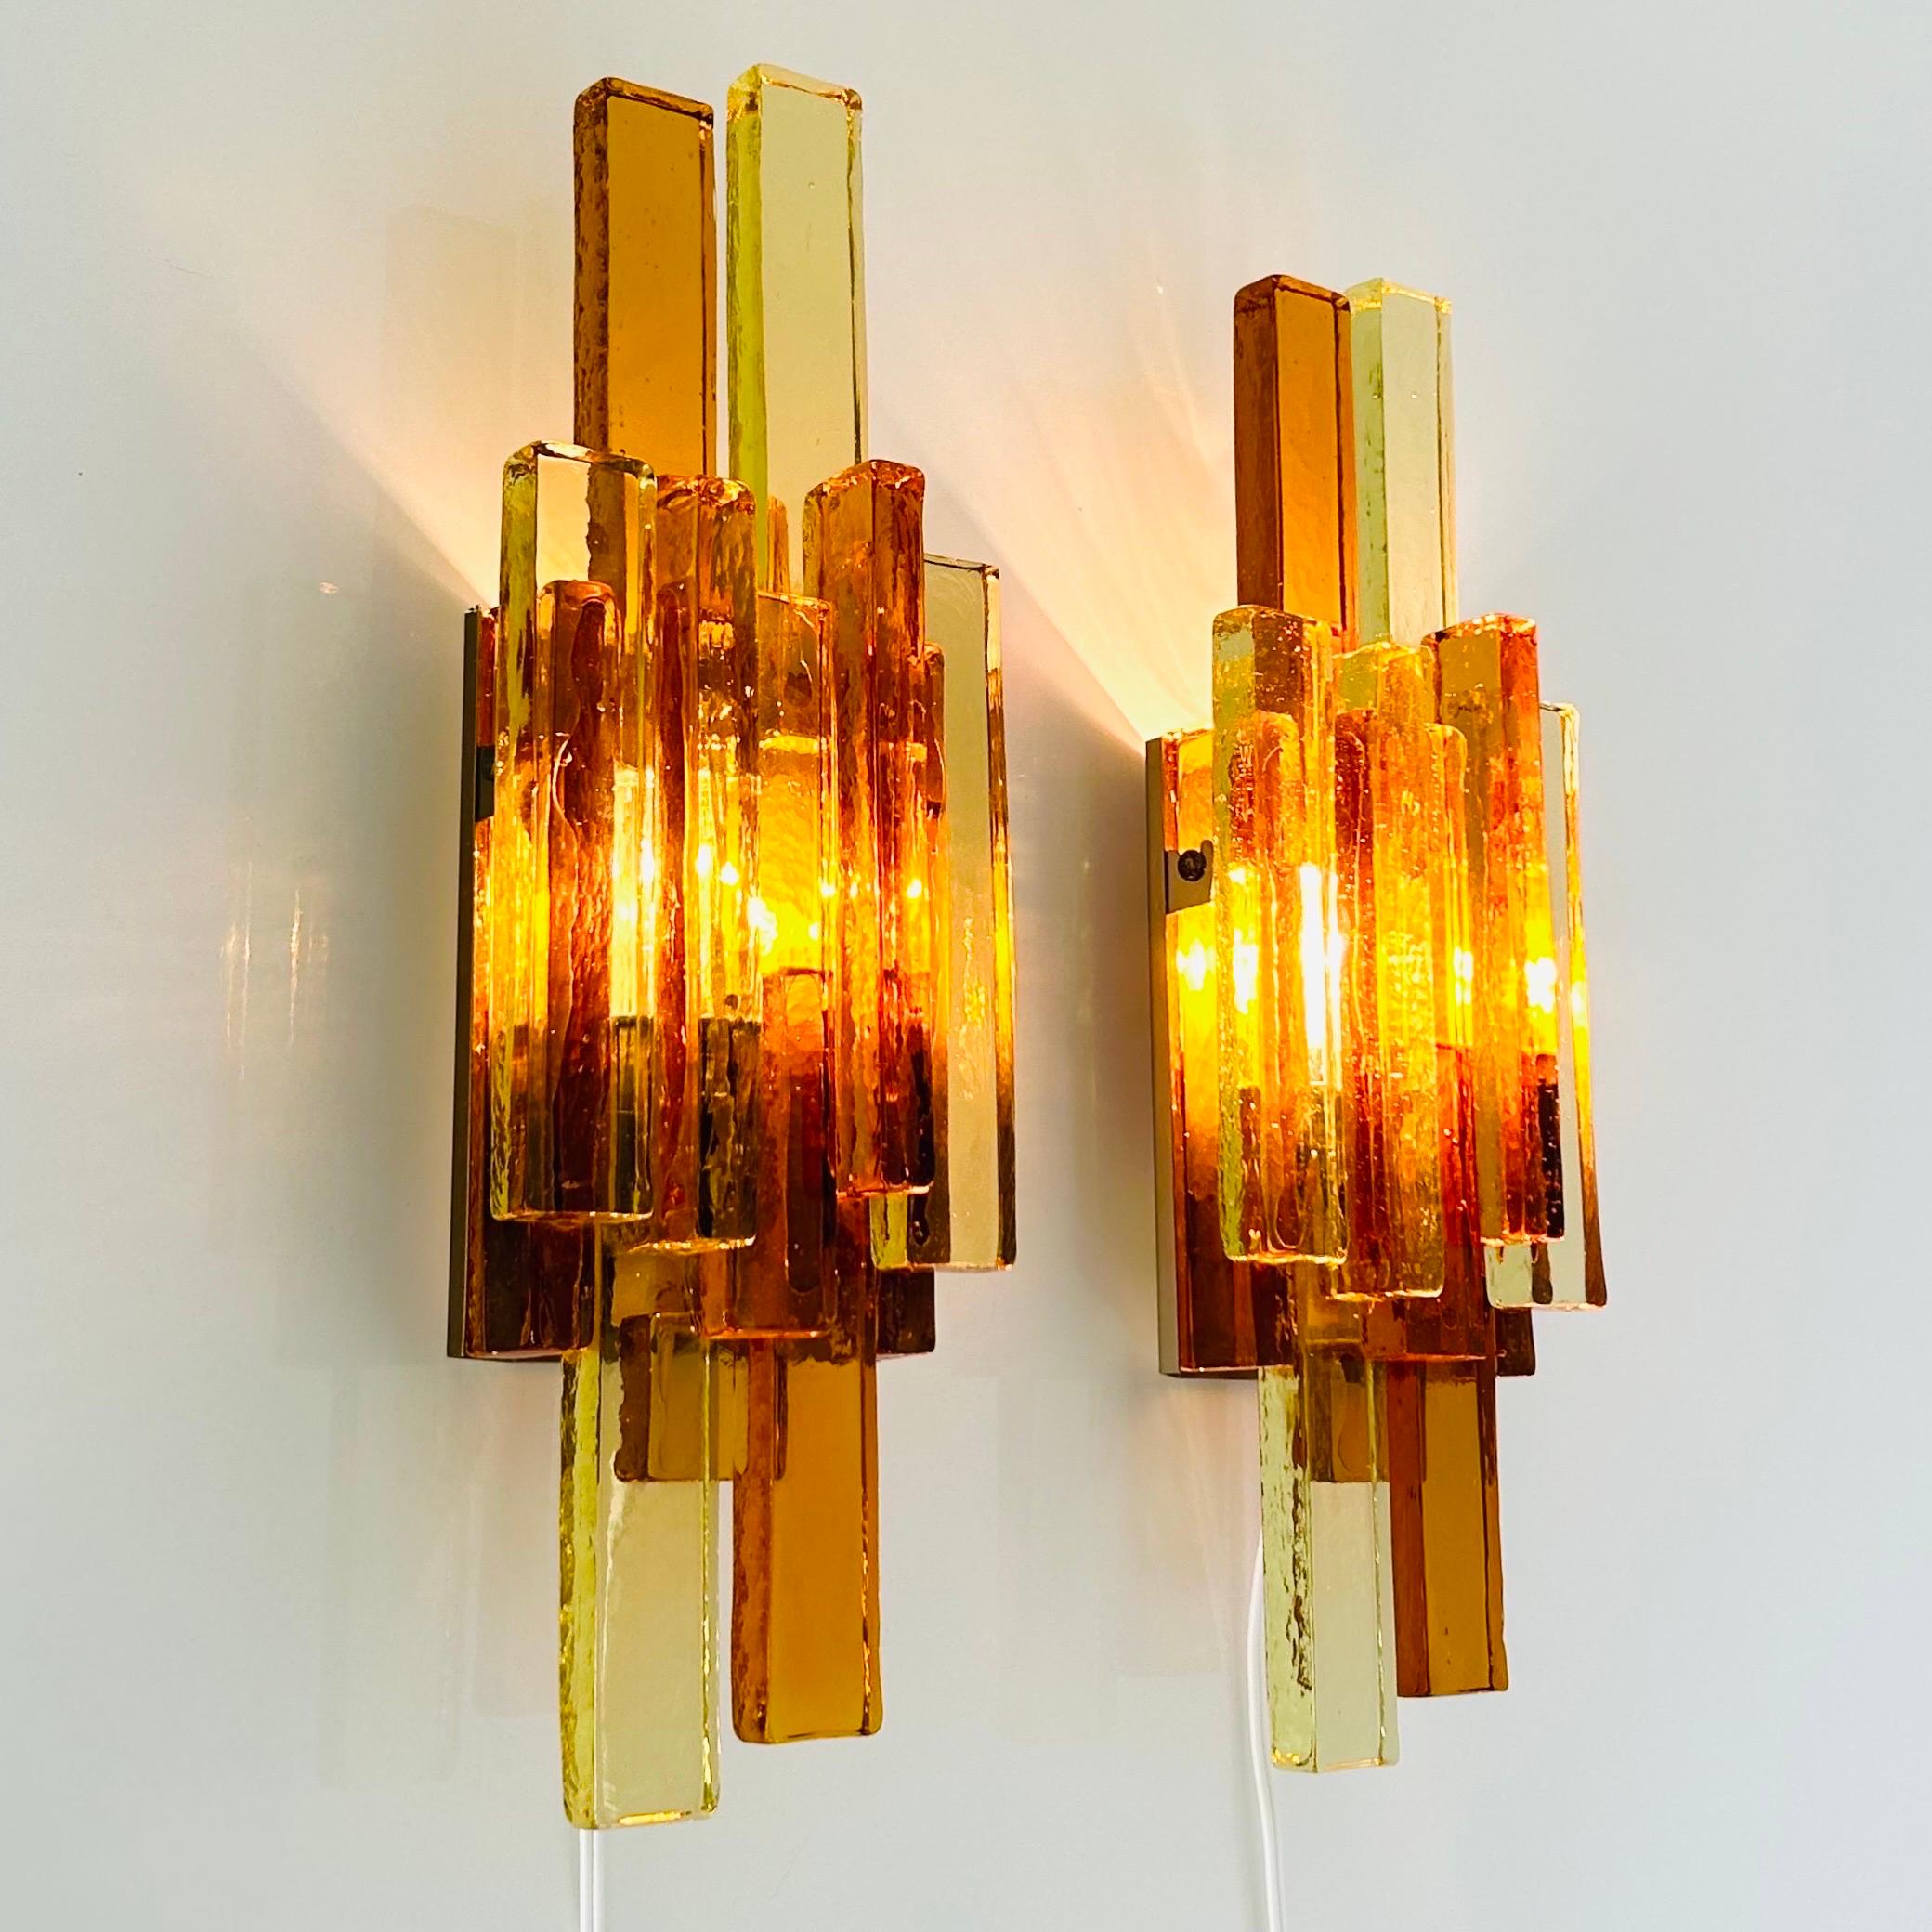 Pair of Yellow and Amber Glass Wall Lamps by Holm Sørensen, 1960s, Denmark For Sale 1